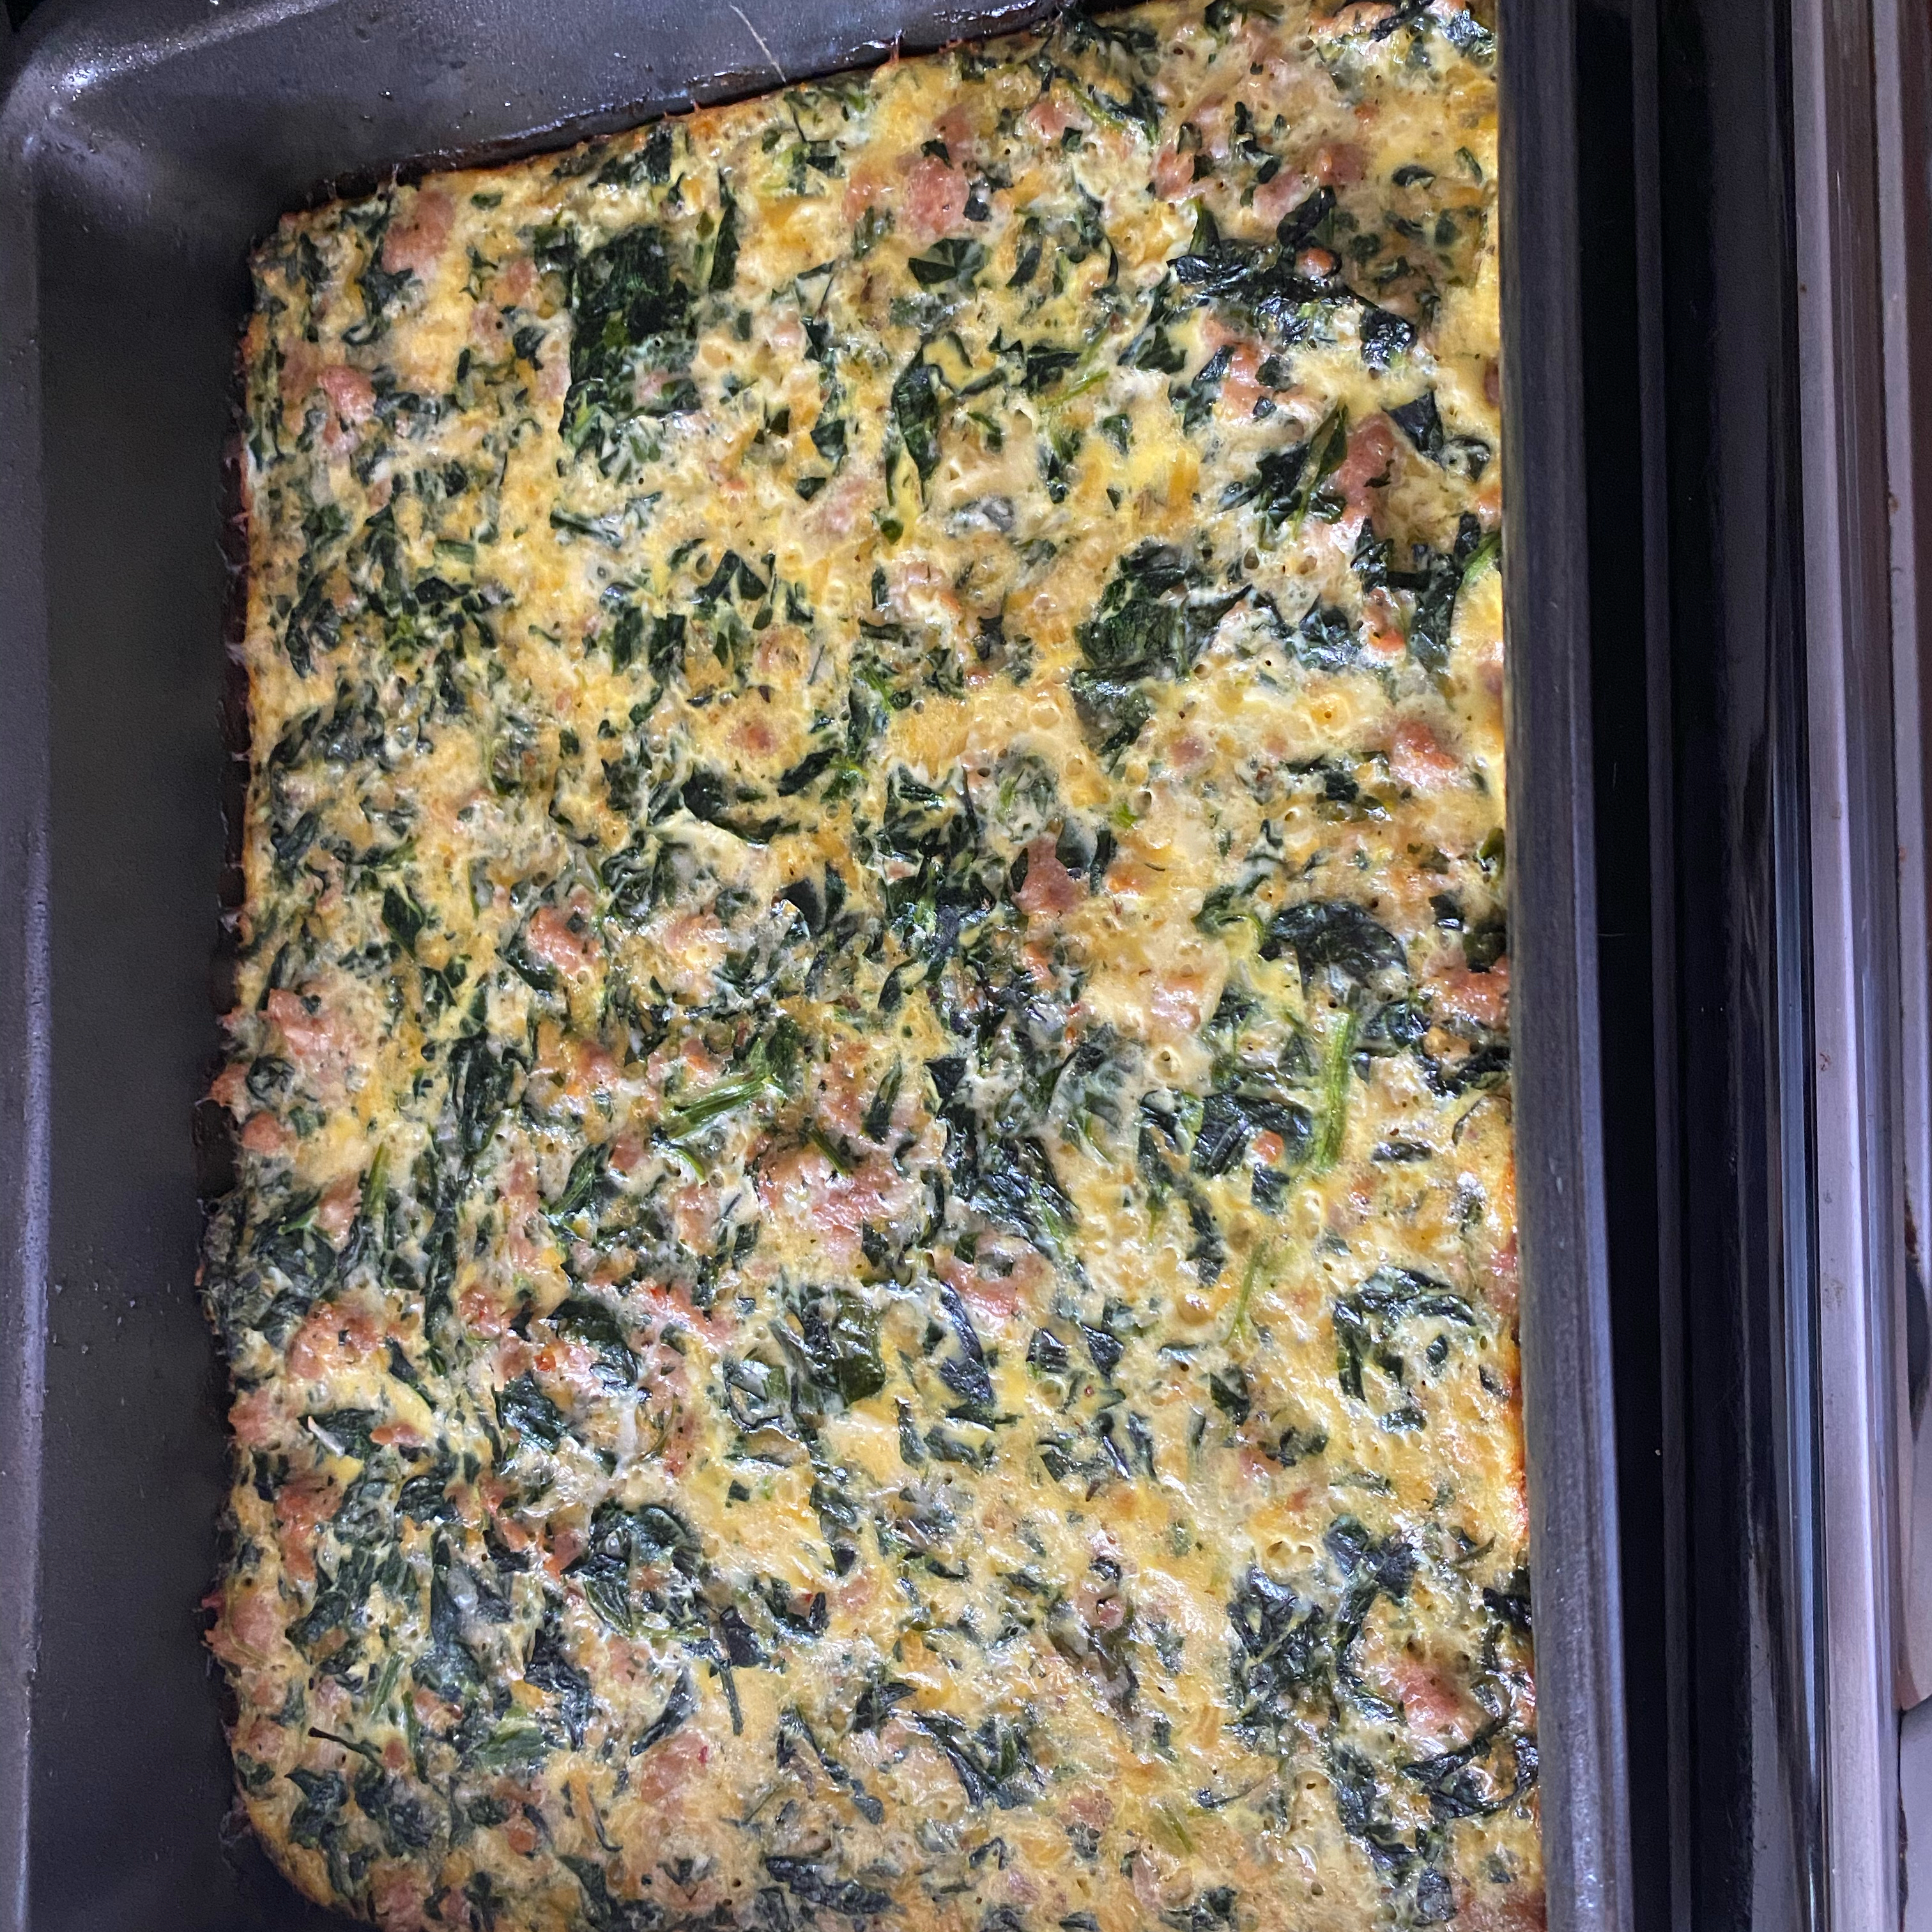 Spinach, Sausage, and Egg Casserole 